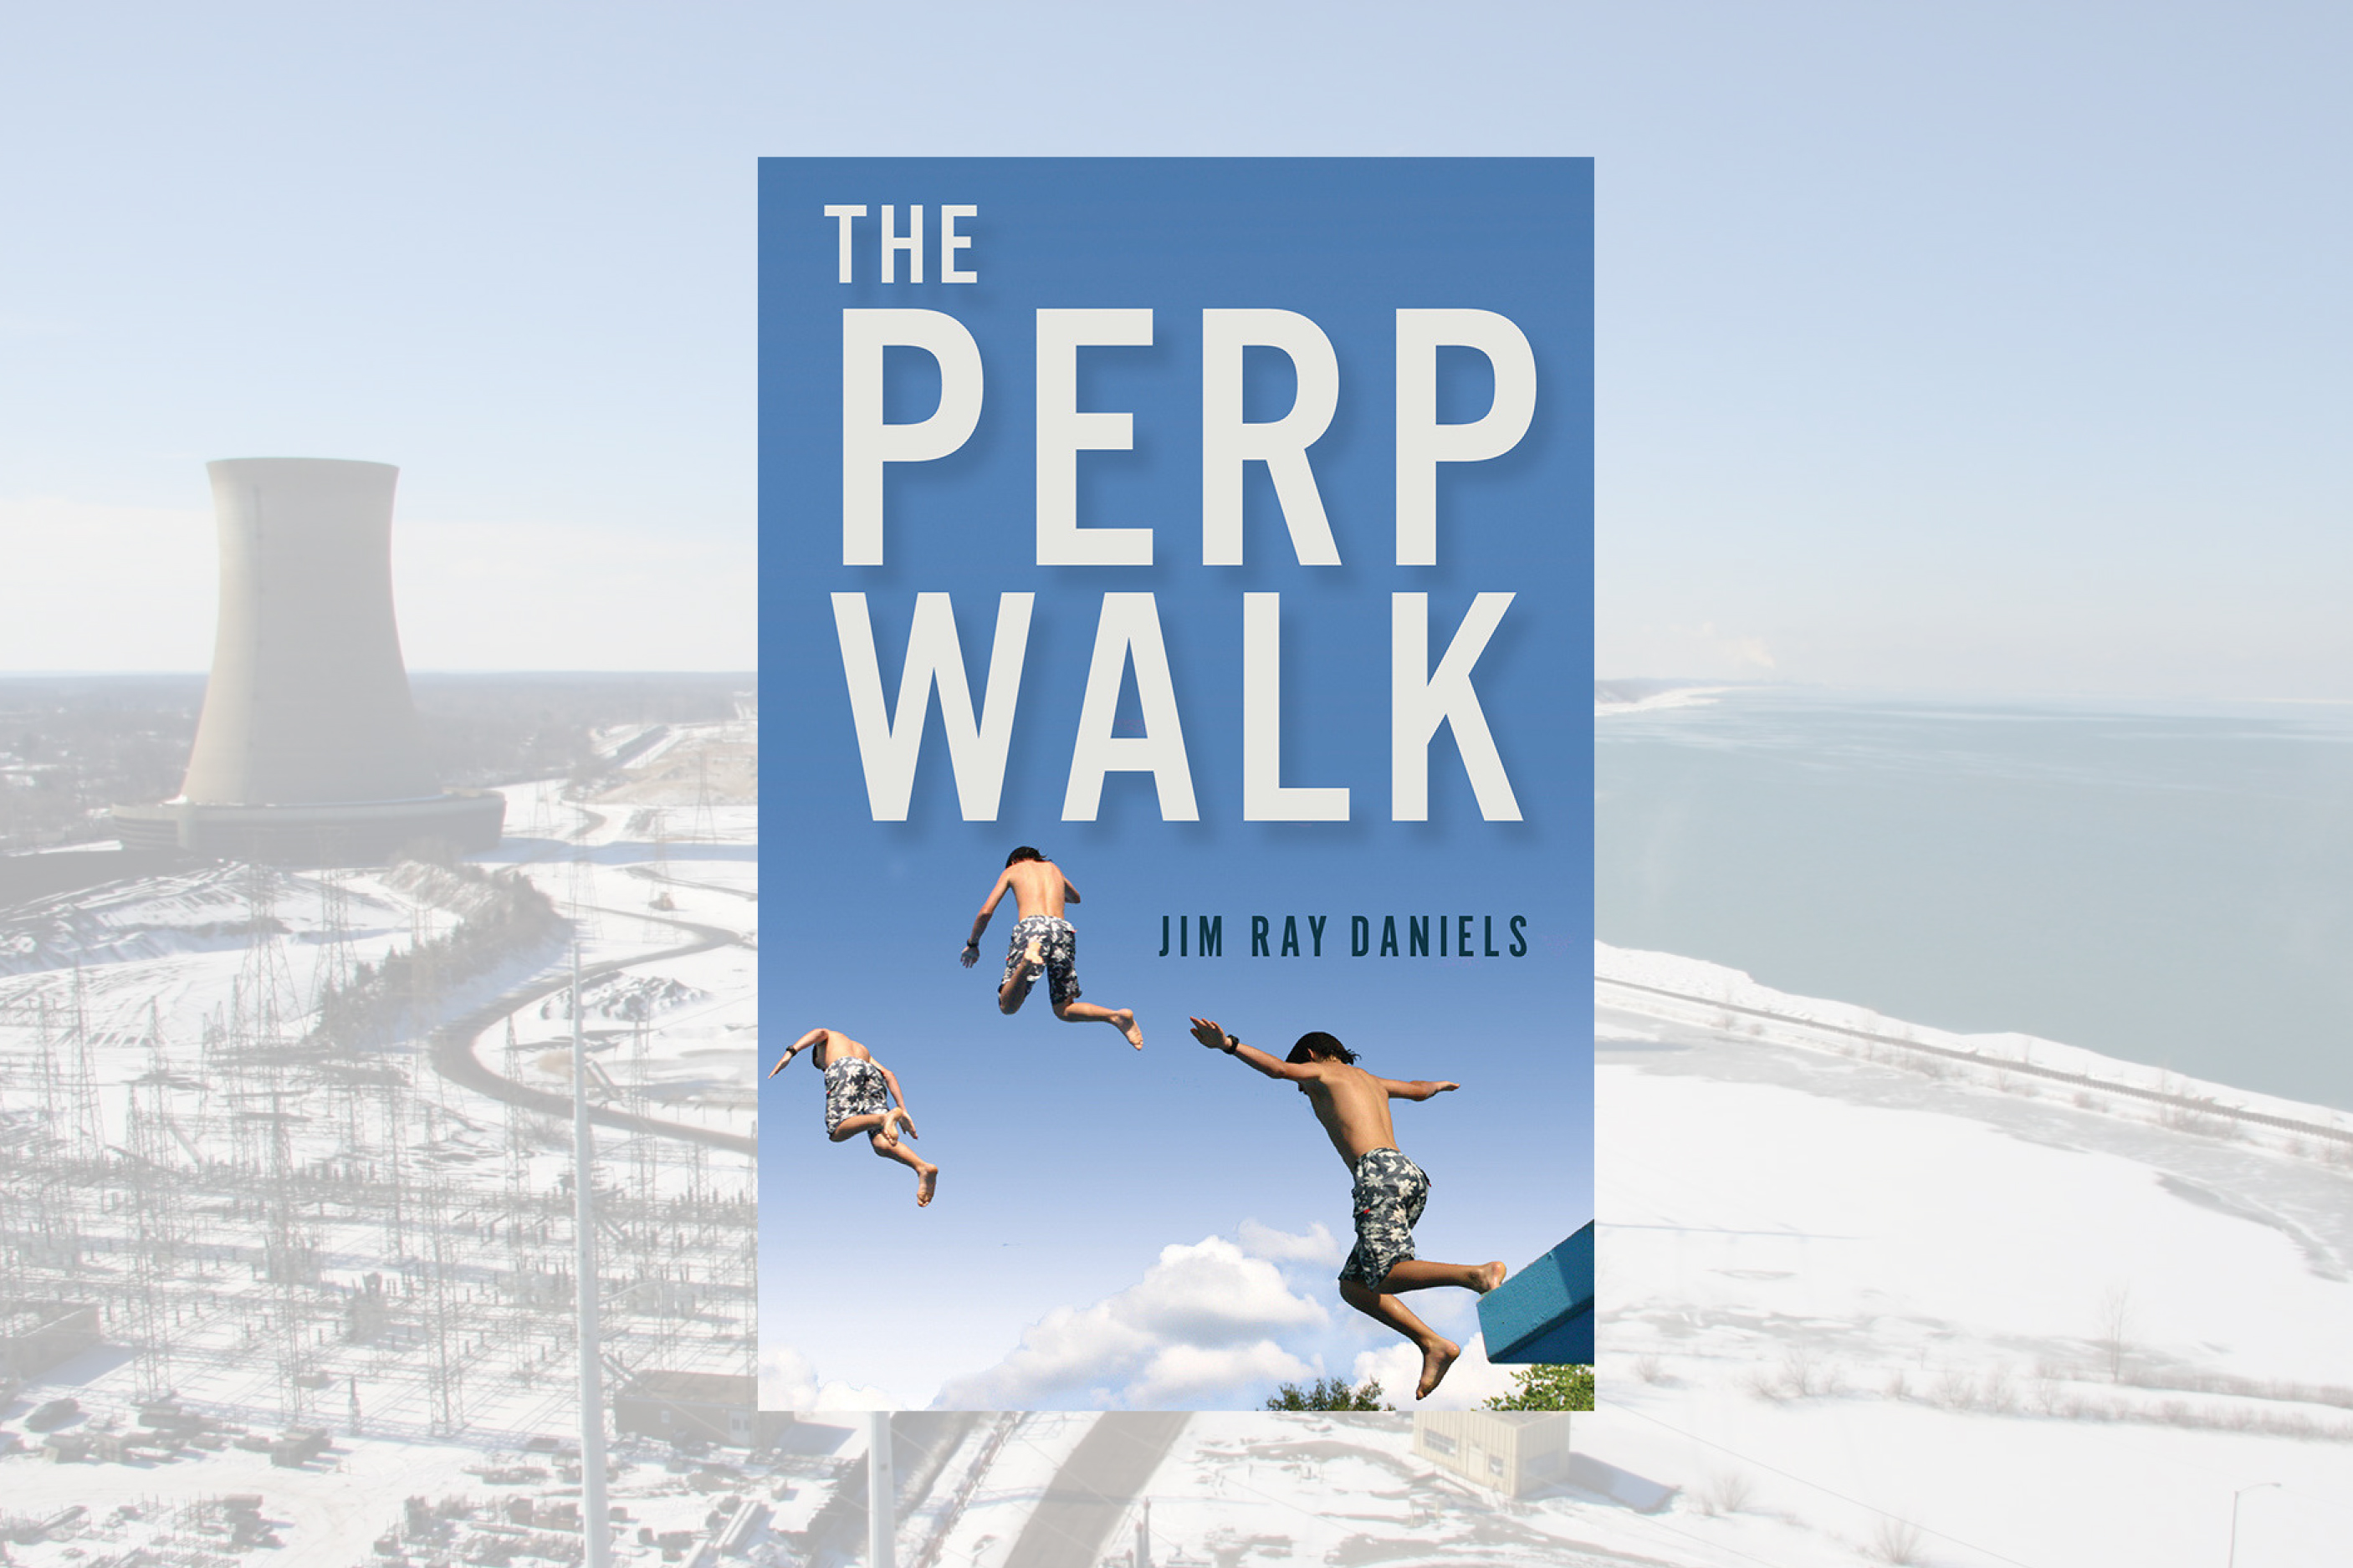 Cover of "The Perp Walk" by faculty member Jim Daniels.